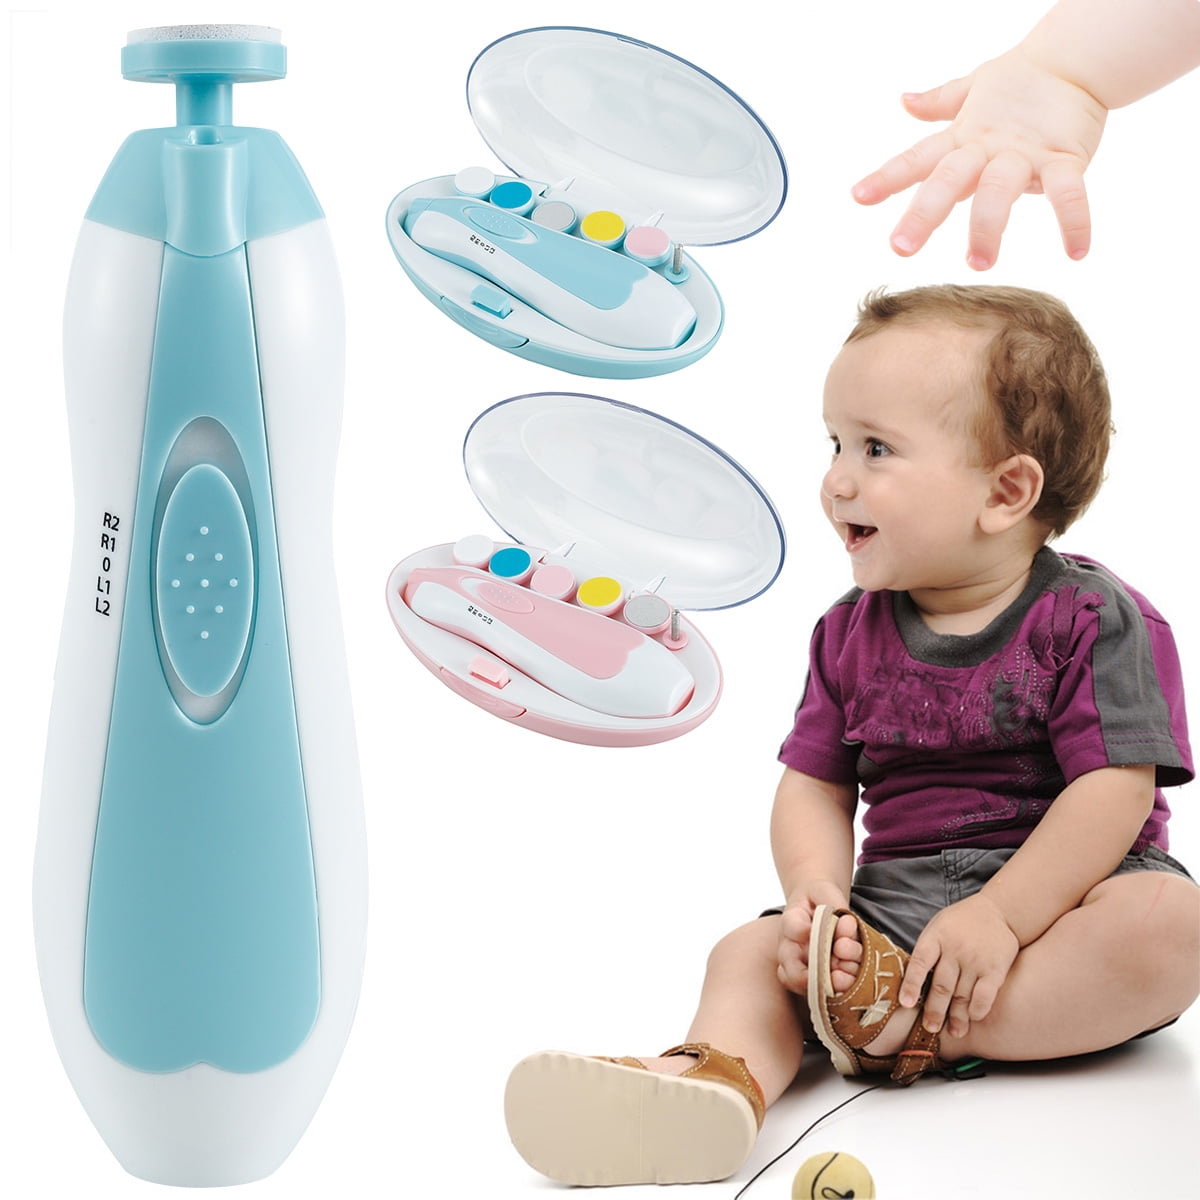 Kyoffiie 6 in 1 Baby Nail Trimmer Baby Nail Filer and Baby Nail Clippers with Light Set for Newborn Toddler 28974313 68c9 4ef7 a54e c113c984eb4d.ba7802b0ce78e16ee81072acc81ae86e